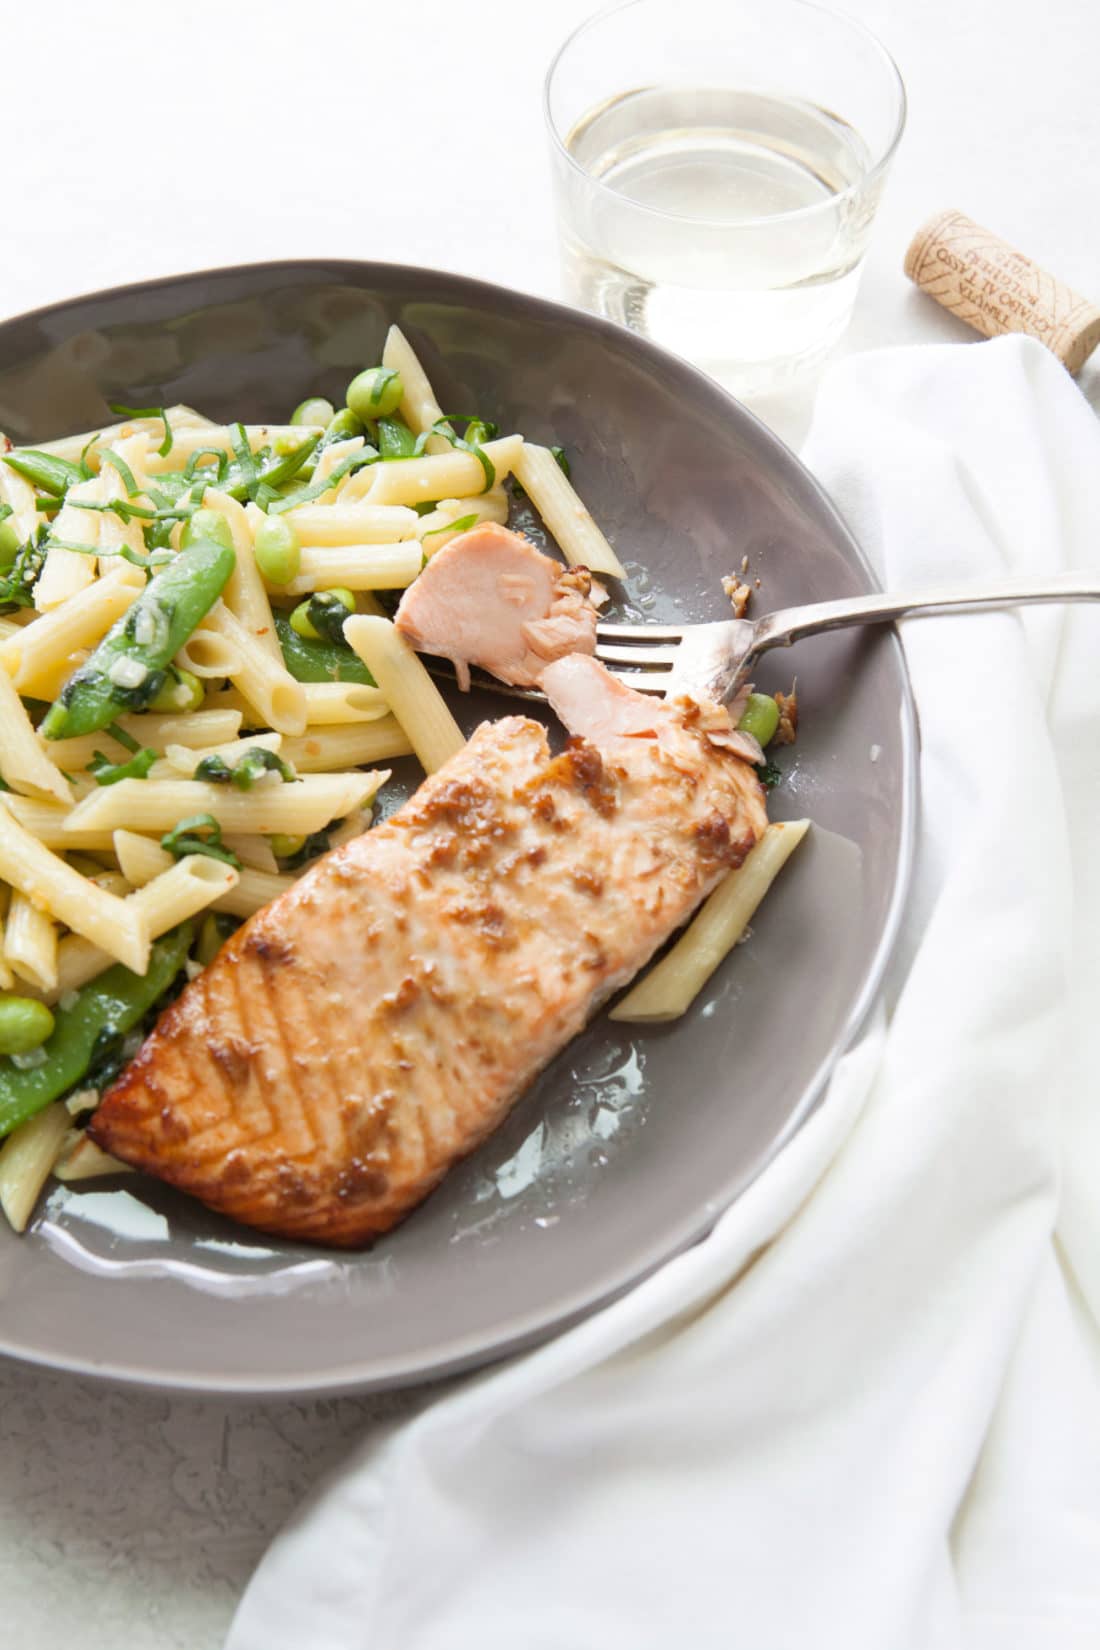 Plate of Fish next to Pasta with Ramps, Edamame, and Peas in a Parmesan Cream Sauce.